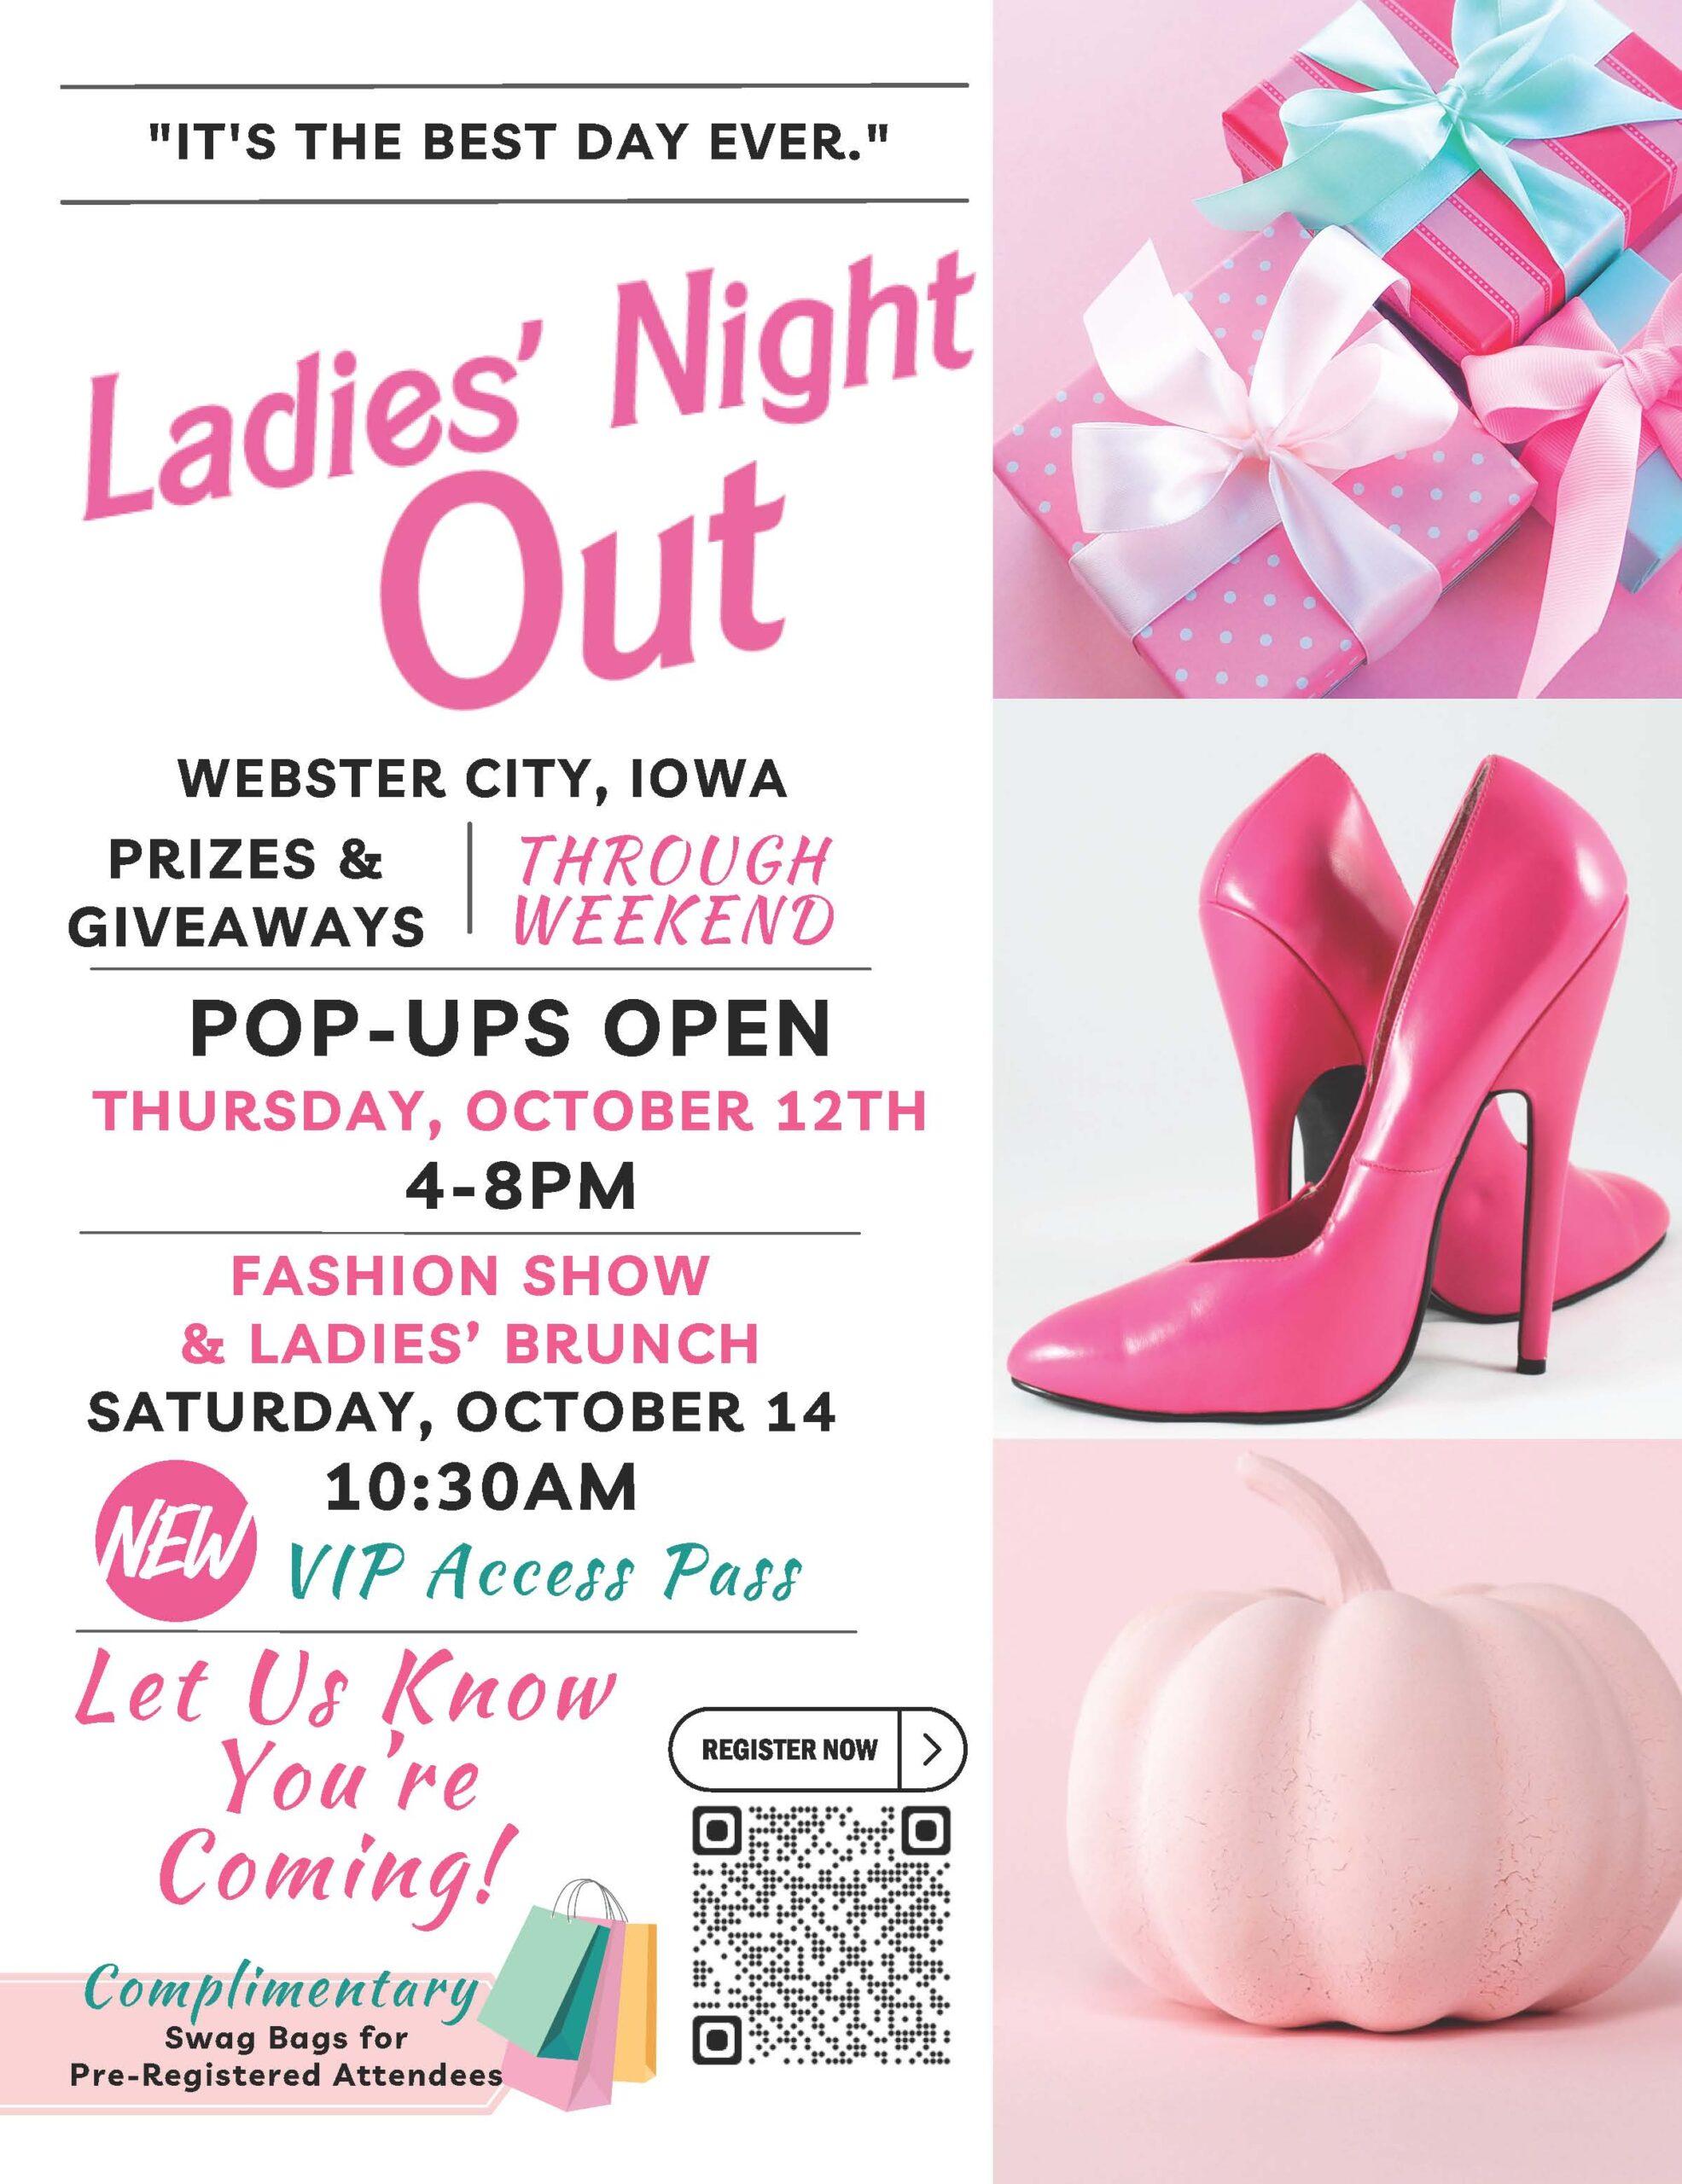 Ladies Night Out flyer in Webster City, Iowa